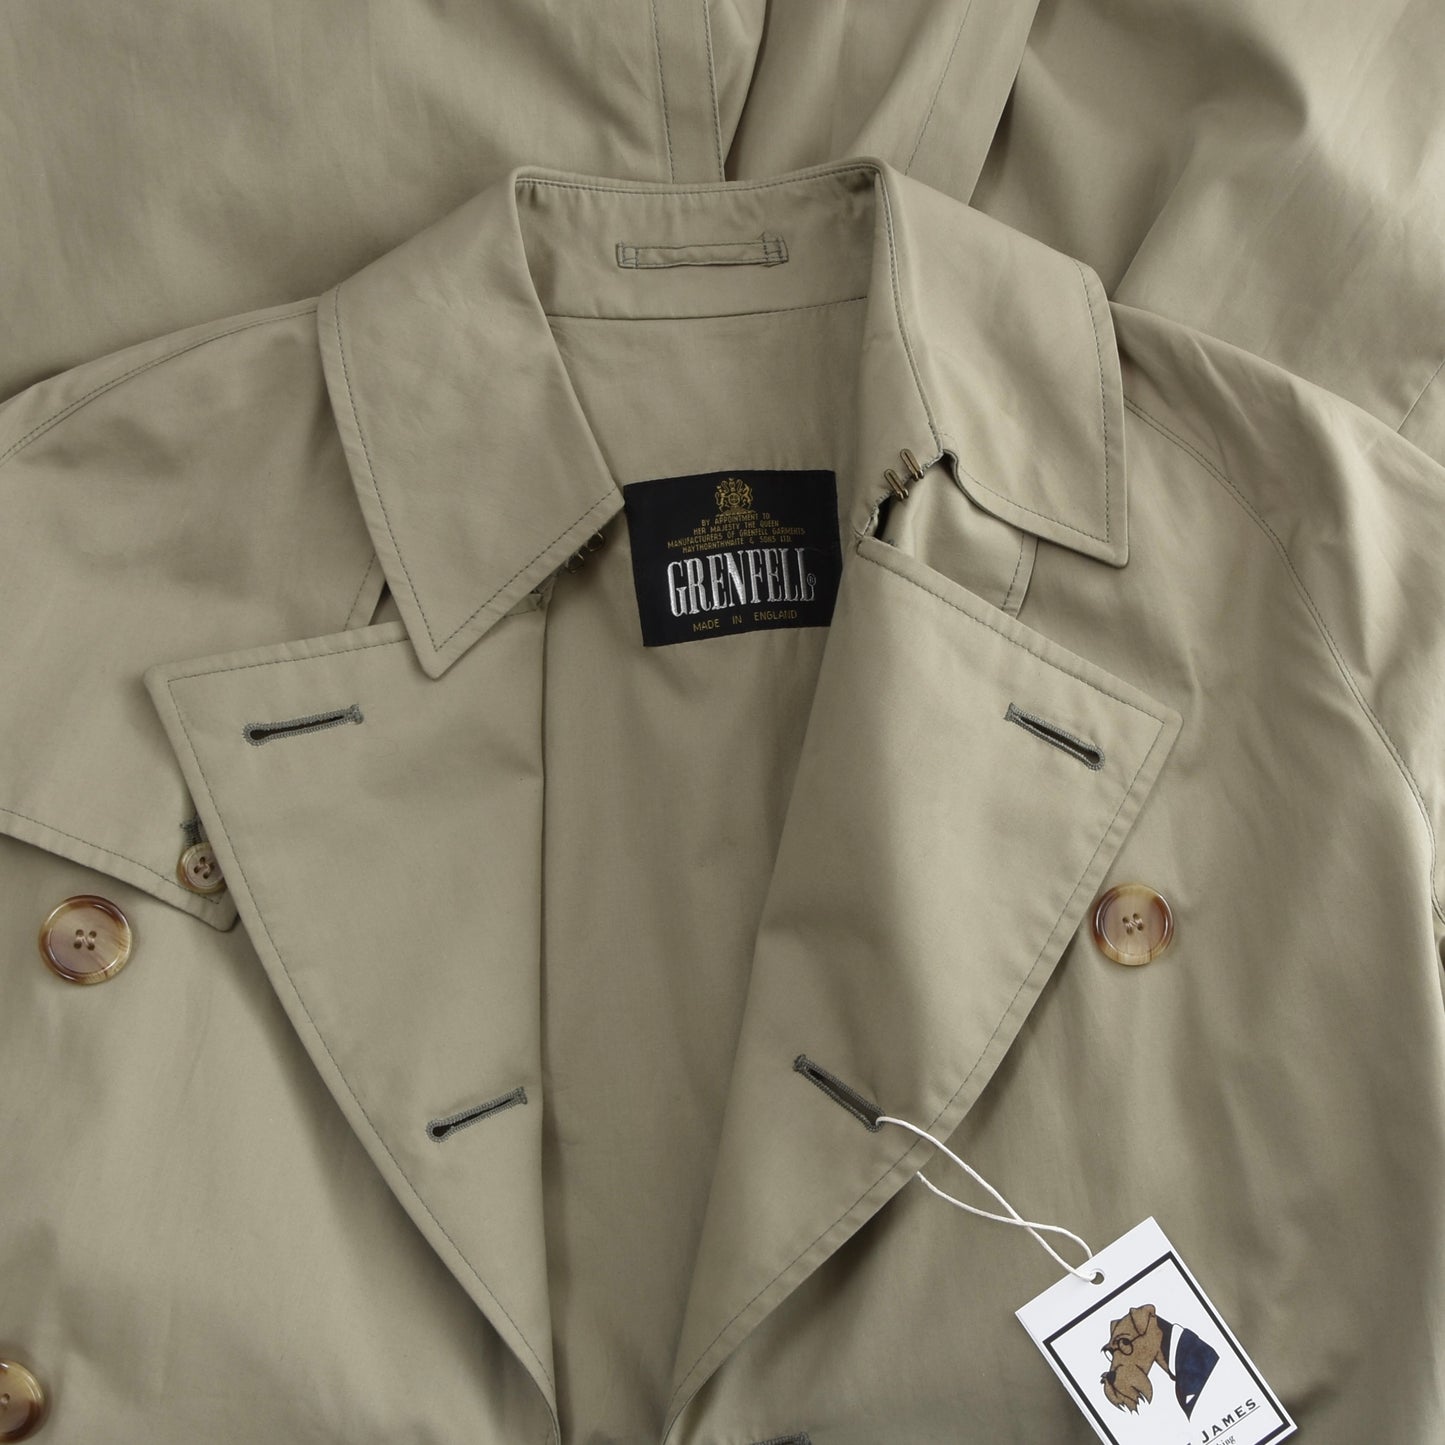 Grenfell Double-Breasted Trench Coat Size 34"/86cm - Tan/Beige